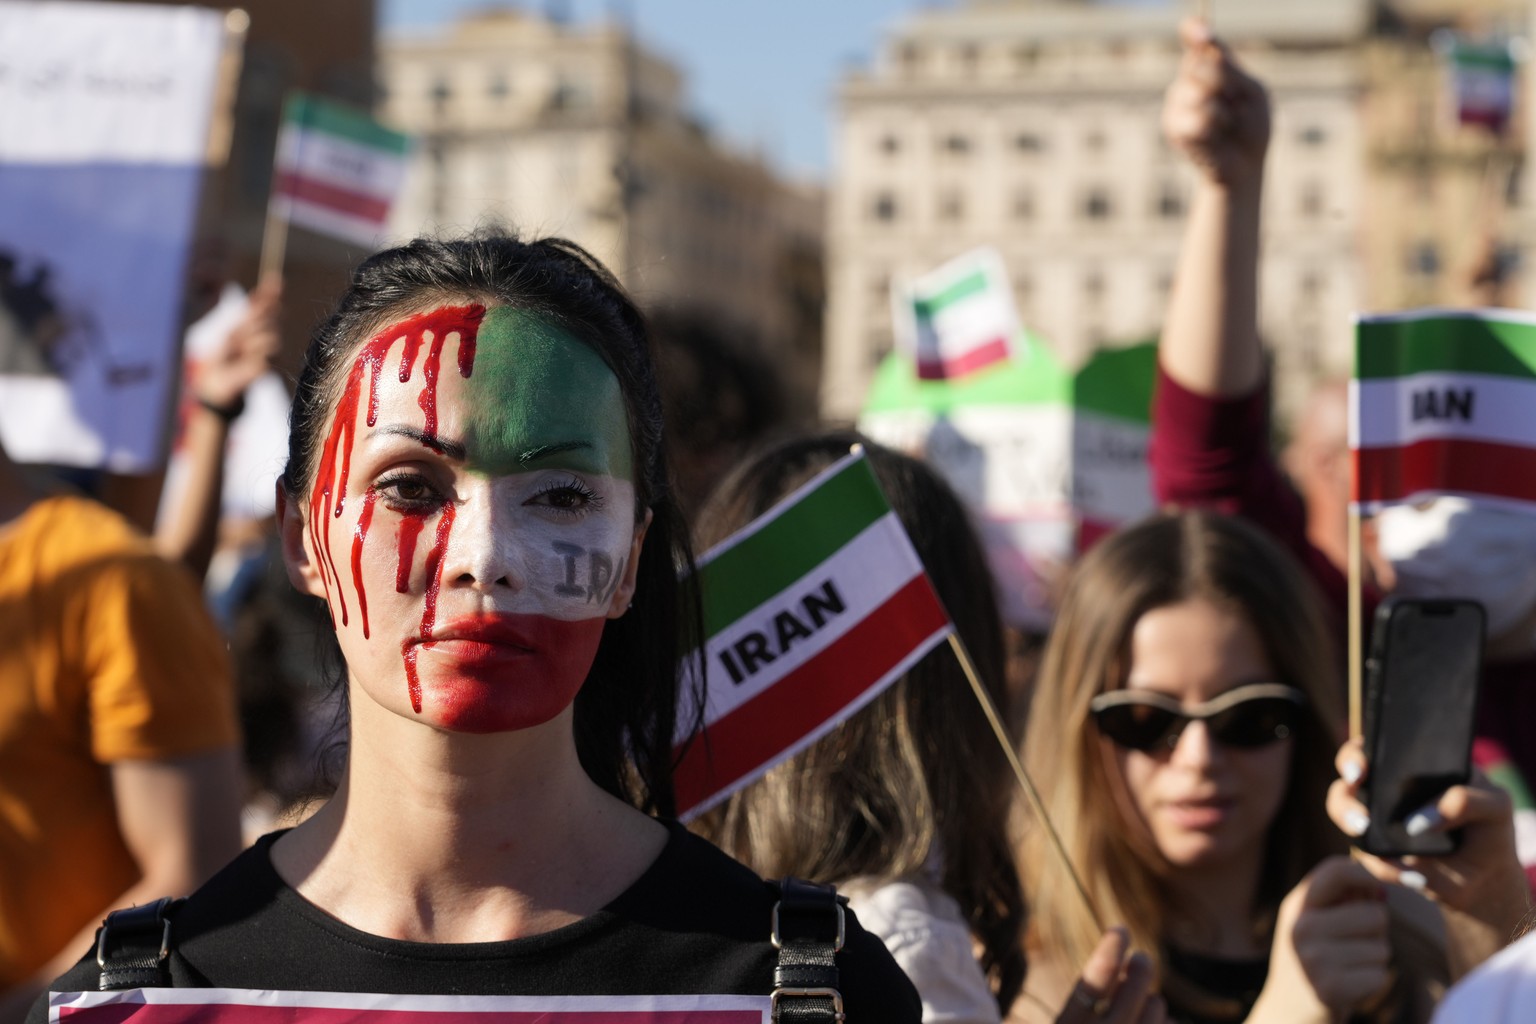 People stage a protest against the death of Mahsa Amini, a woman who died while in police custody in Iran, during a rally in central Rome, Saturday, Oct. 29, 2022. Amini, a 22-year-old woman was held  ...